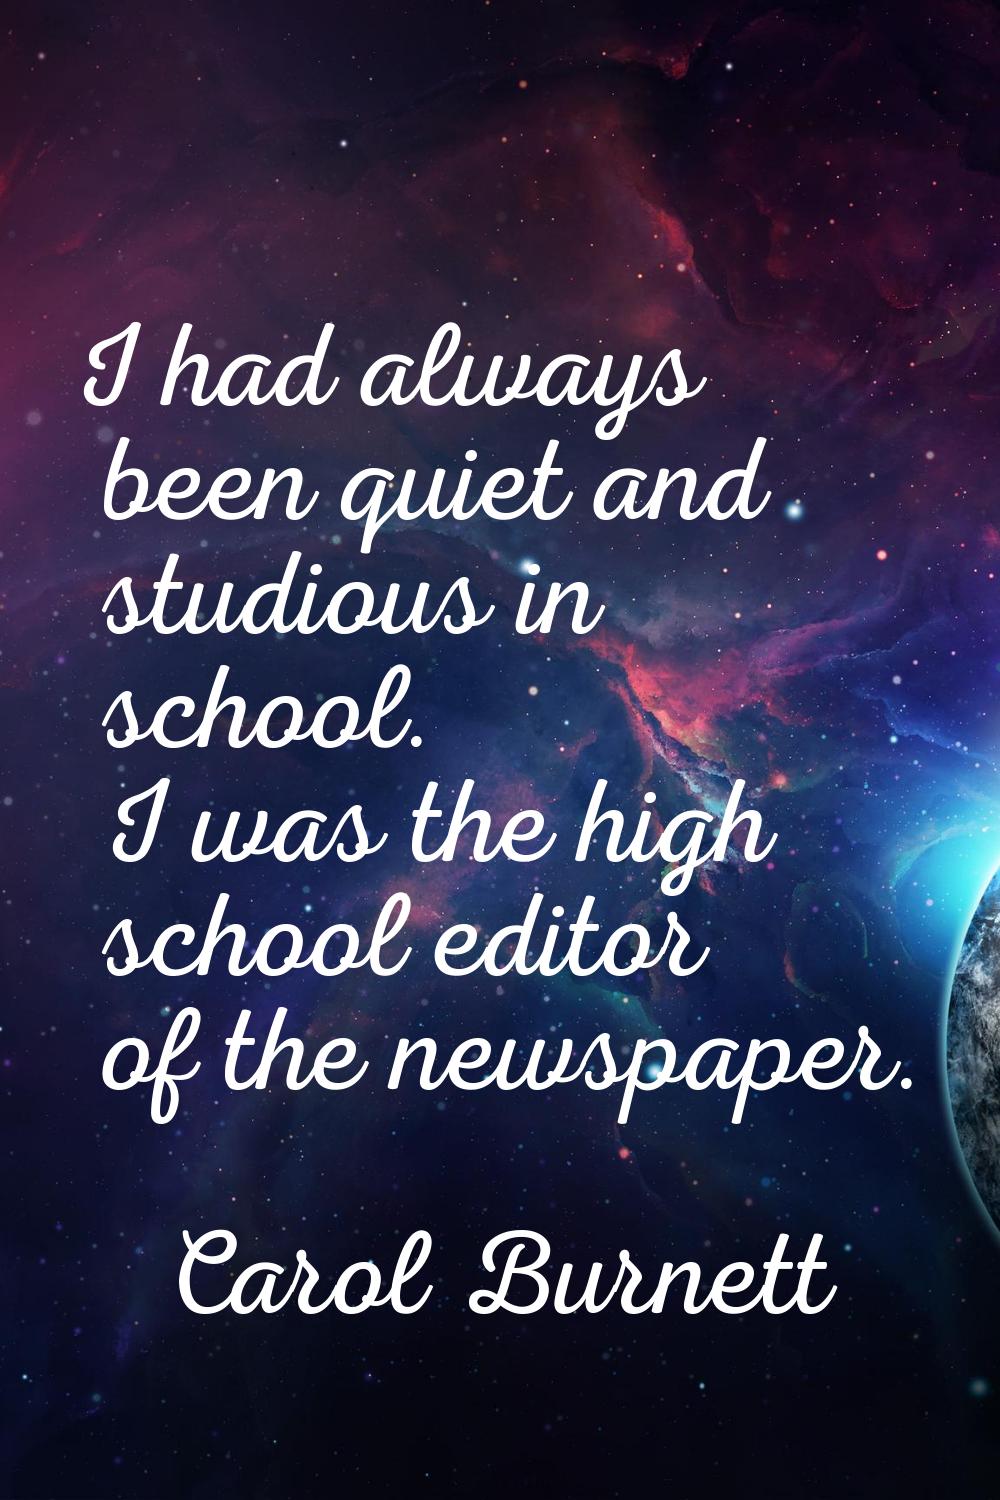 I had always been quiet and studious in school. I was the high school editor of the newspaper.